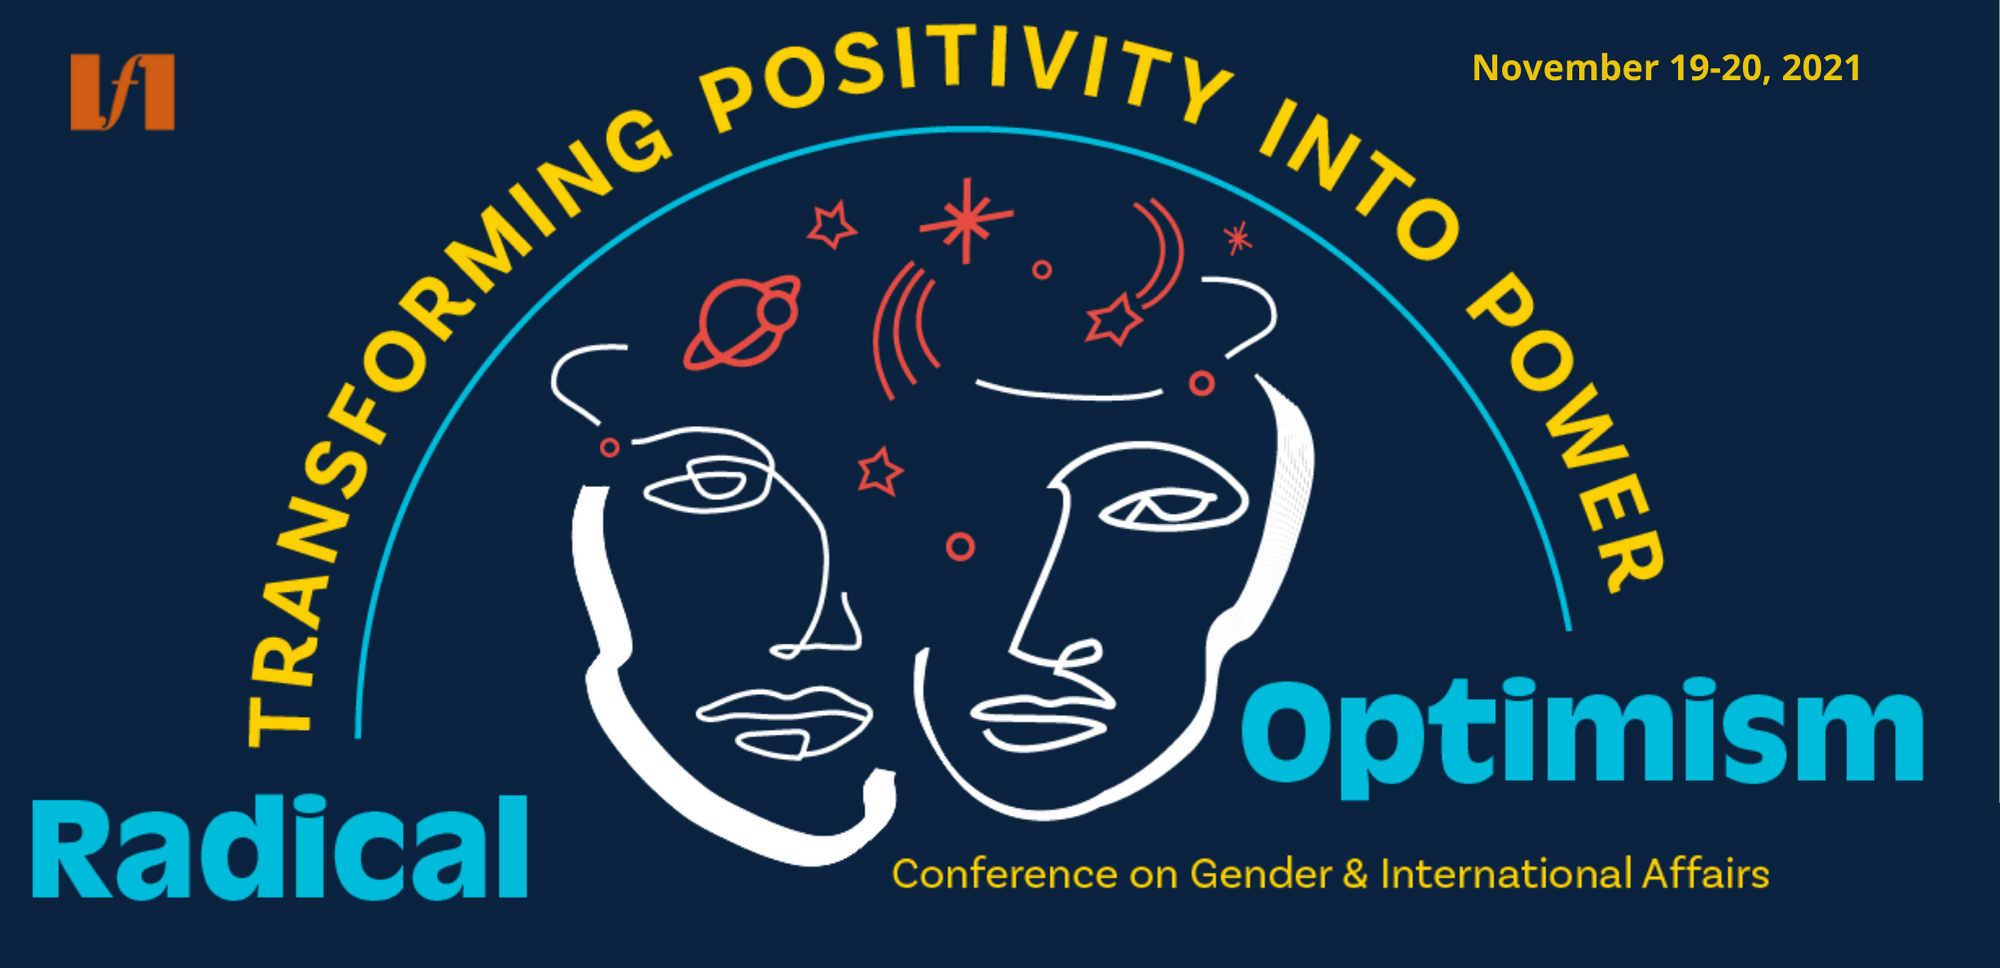 Conference on Gender and International Affairs Highlights Power of Optimism